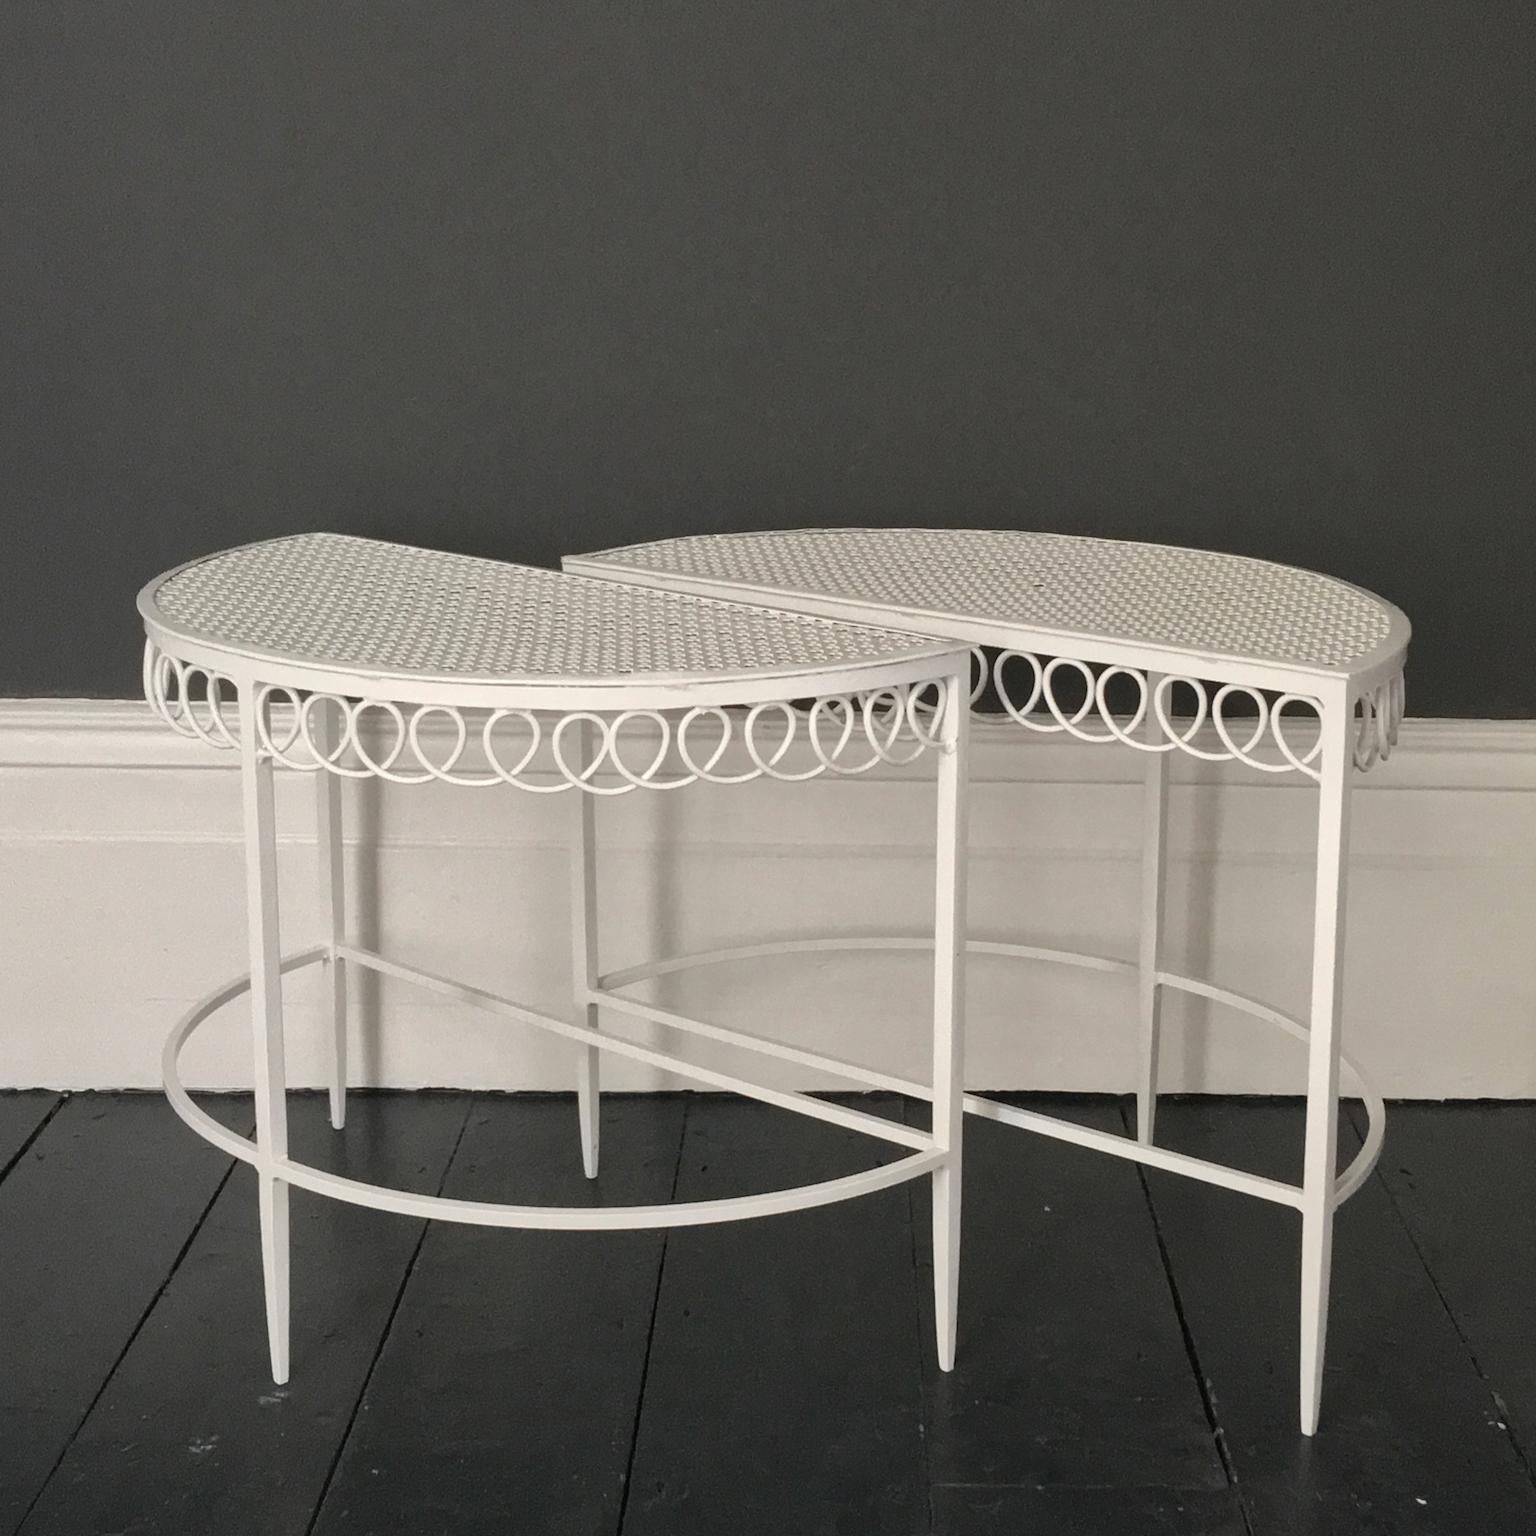 French Pair of Demilune Metal Tables in White by Matégot, Mid-20th Century France